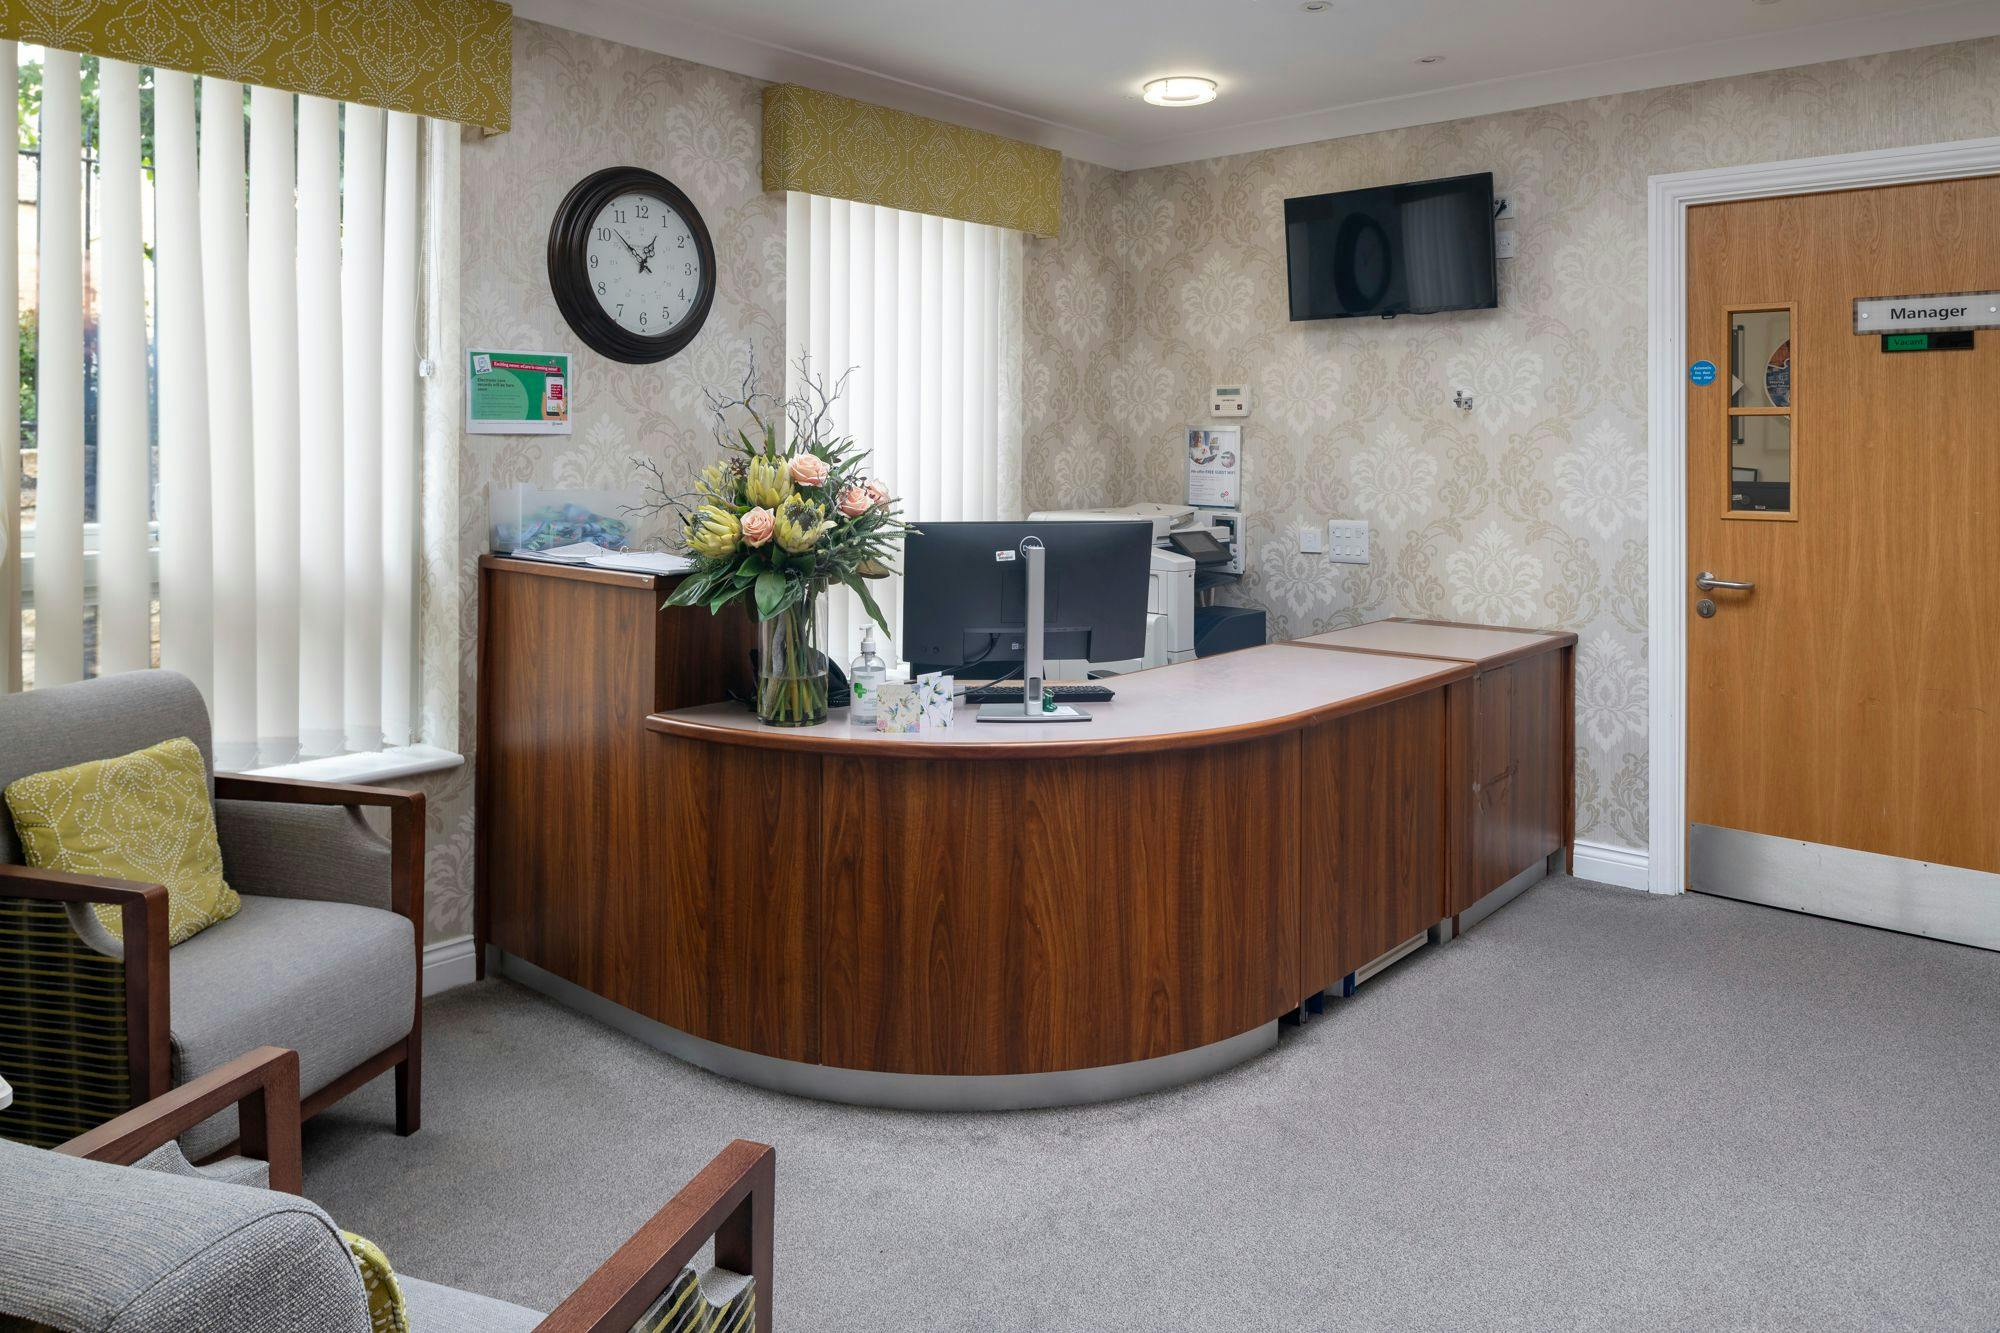 Front desk at Edwardstow Court Care Home in Stow-on-the-Wold, Cotswold